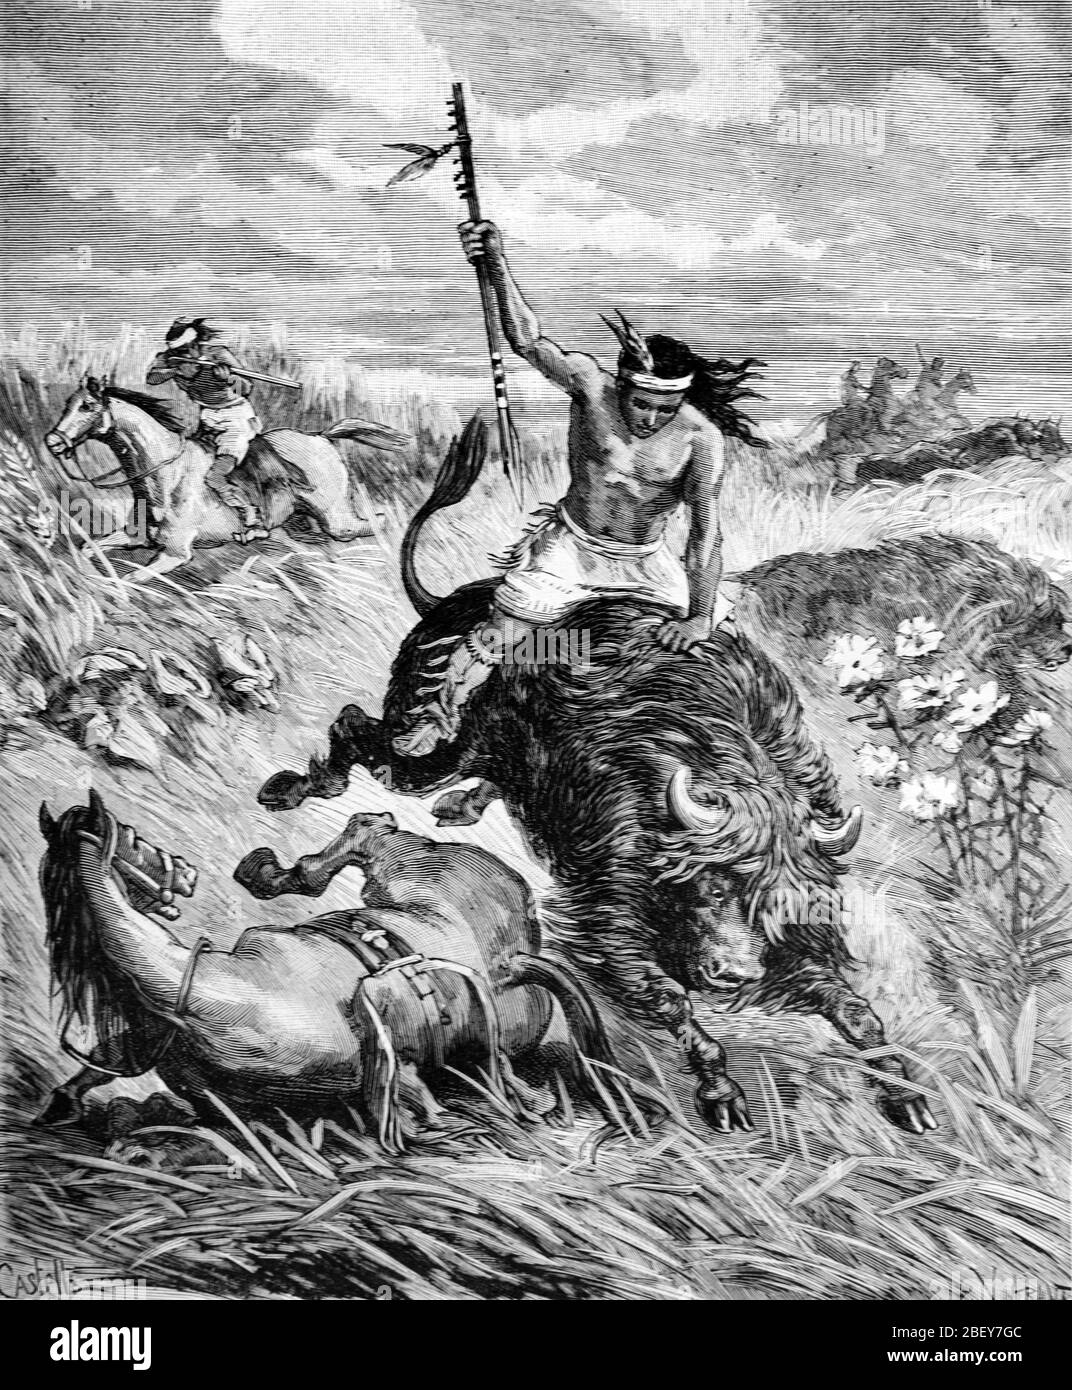 Comanche Plains Indian Hunting Bison or American Buffalo on the Great Plains United States of America USA or US. Vintage or Old Illustration or Engraving 1888 Stock Photo